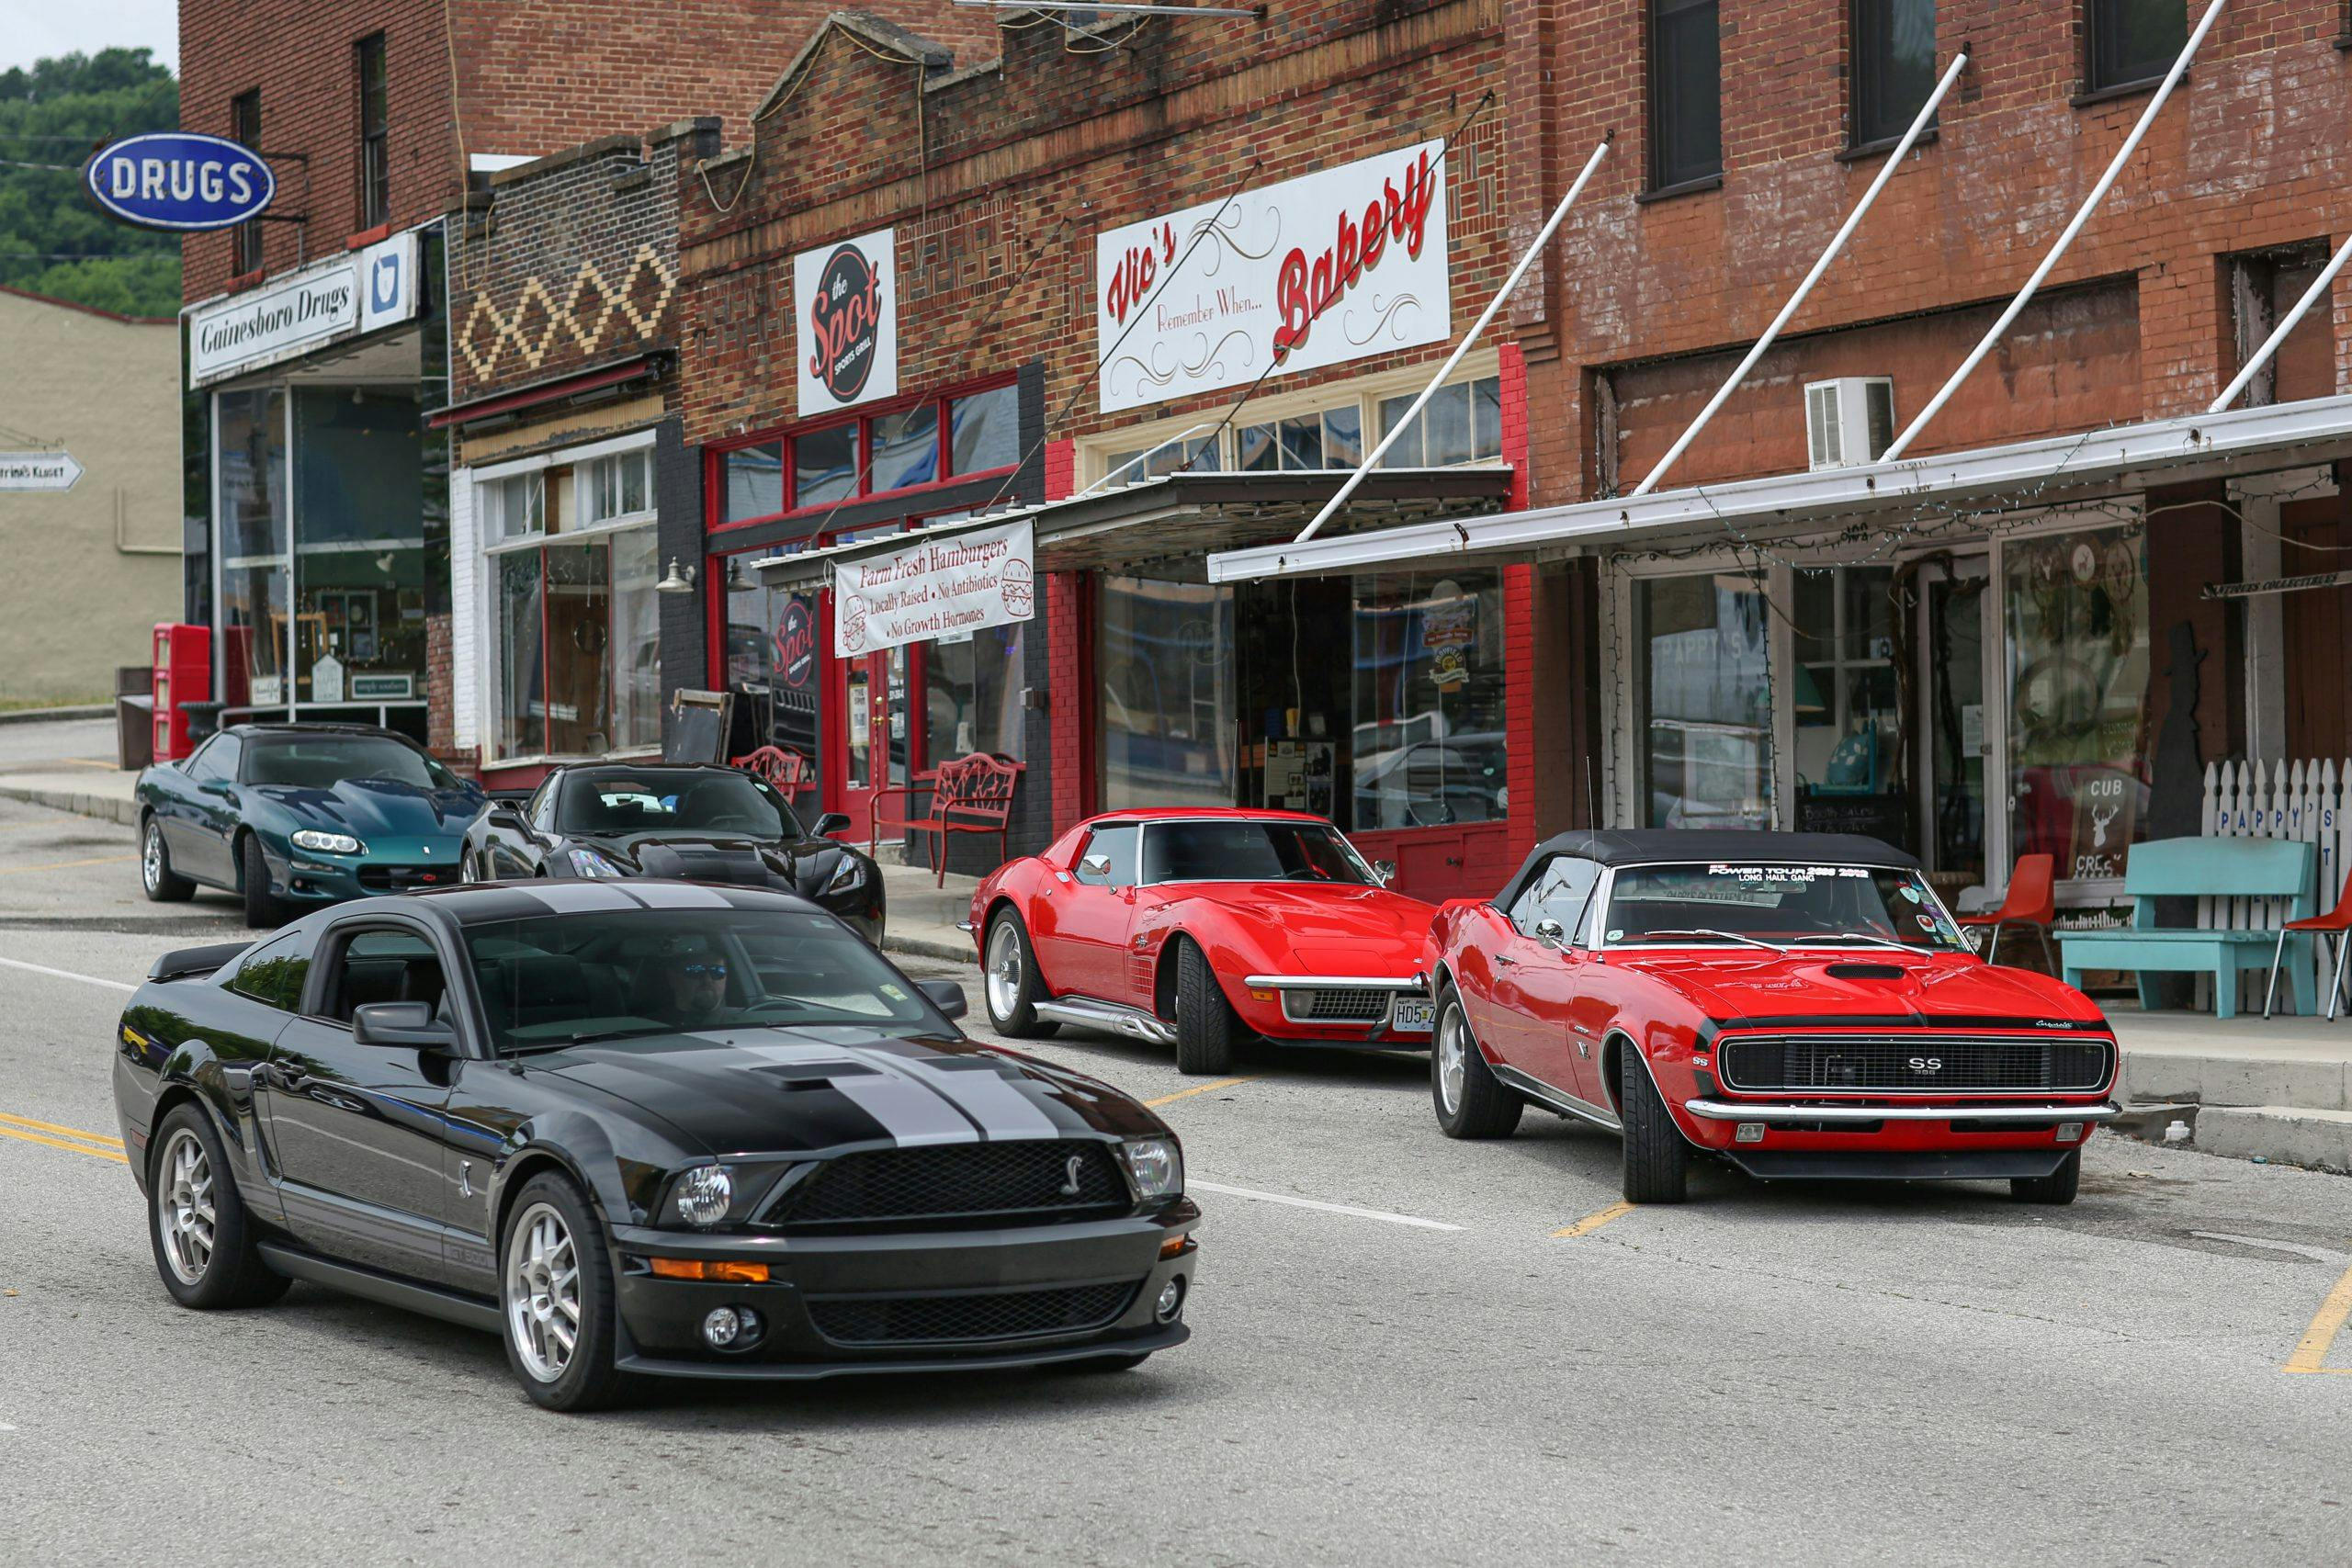 Cars gather downtown for Power Tour